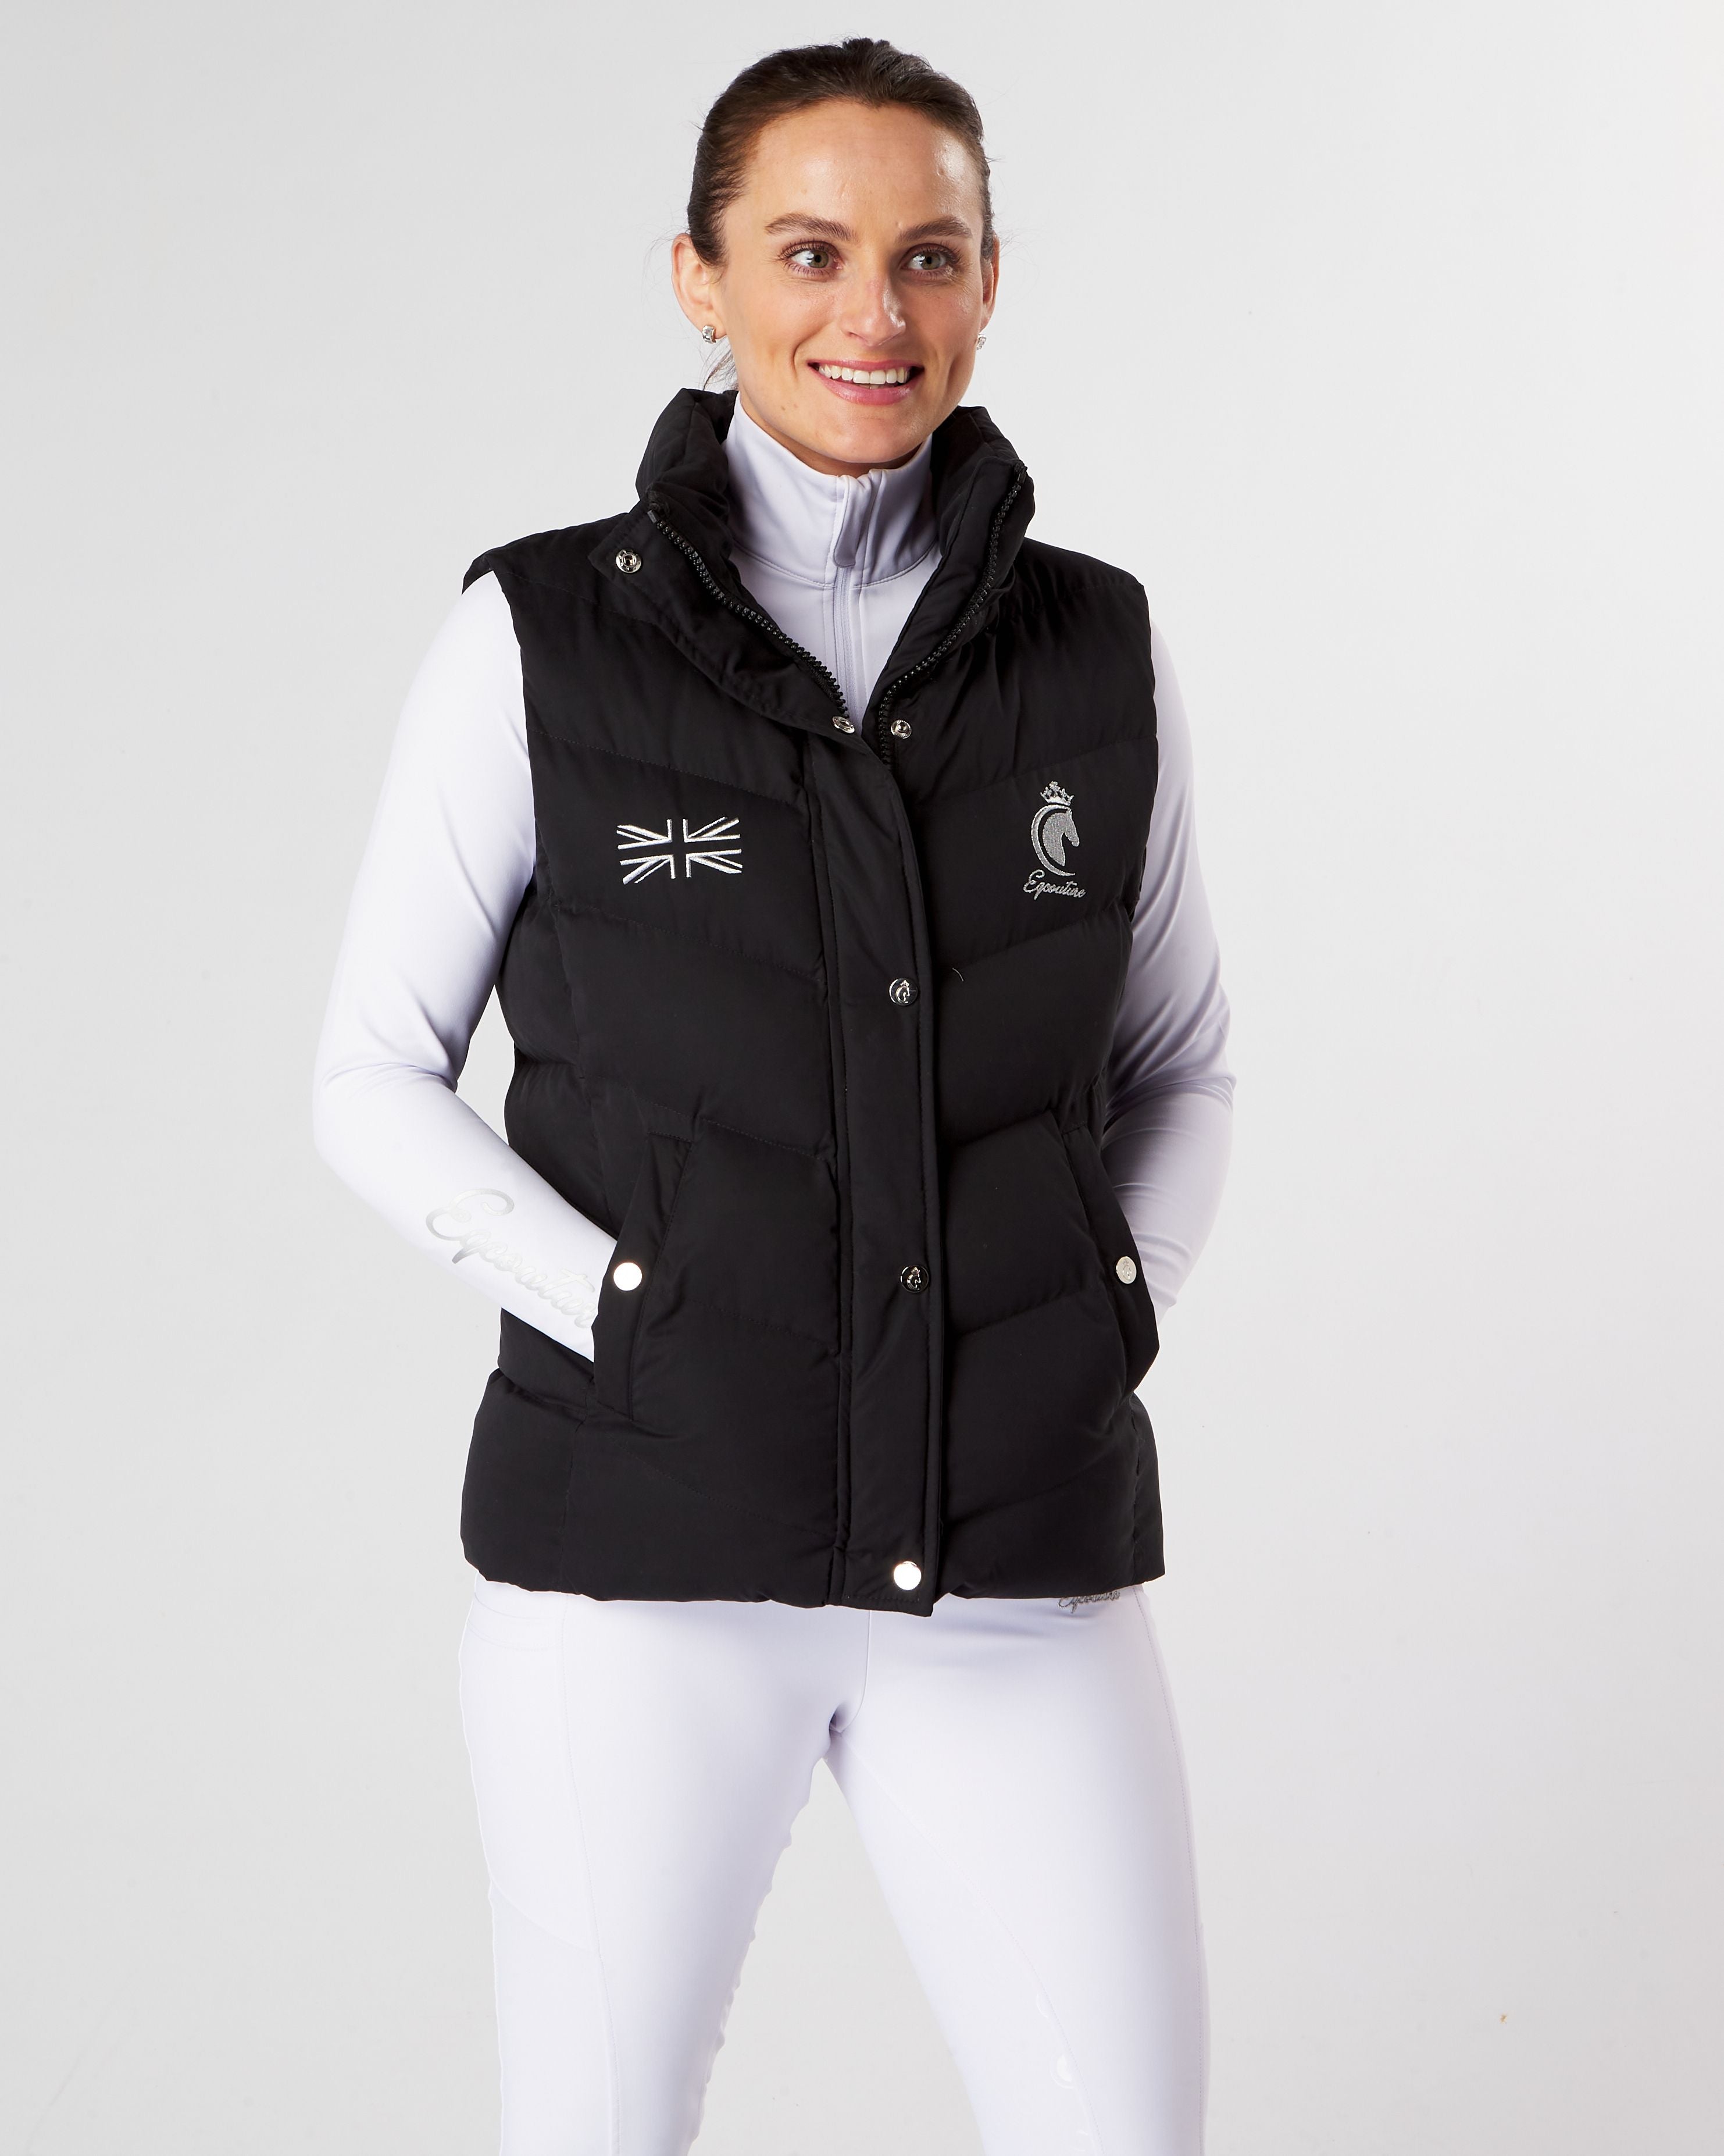 white competition technical equestrian base layer / show shirt sports horse riding top